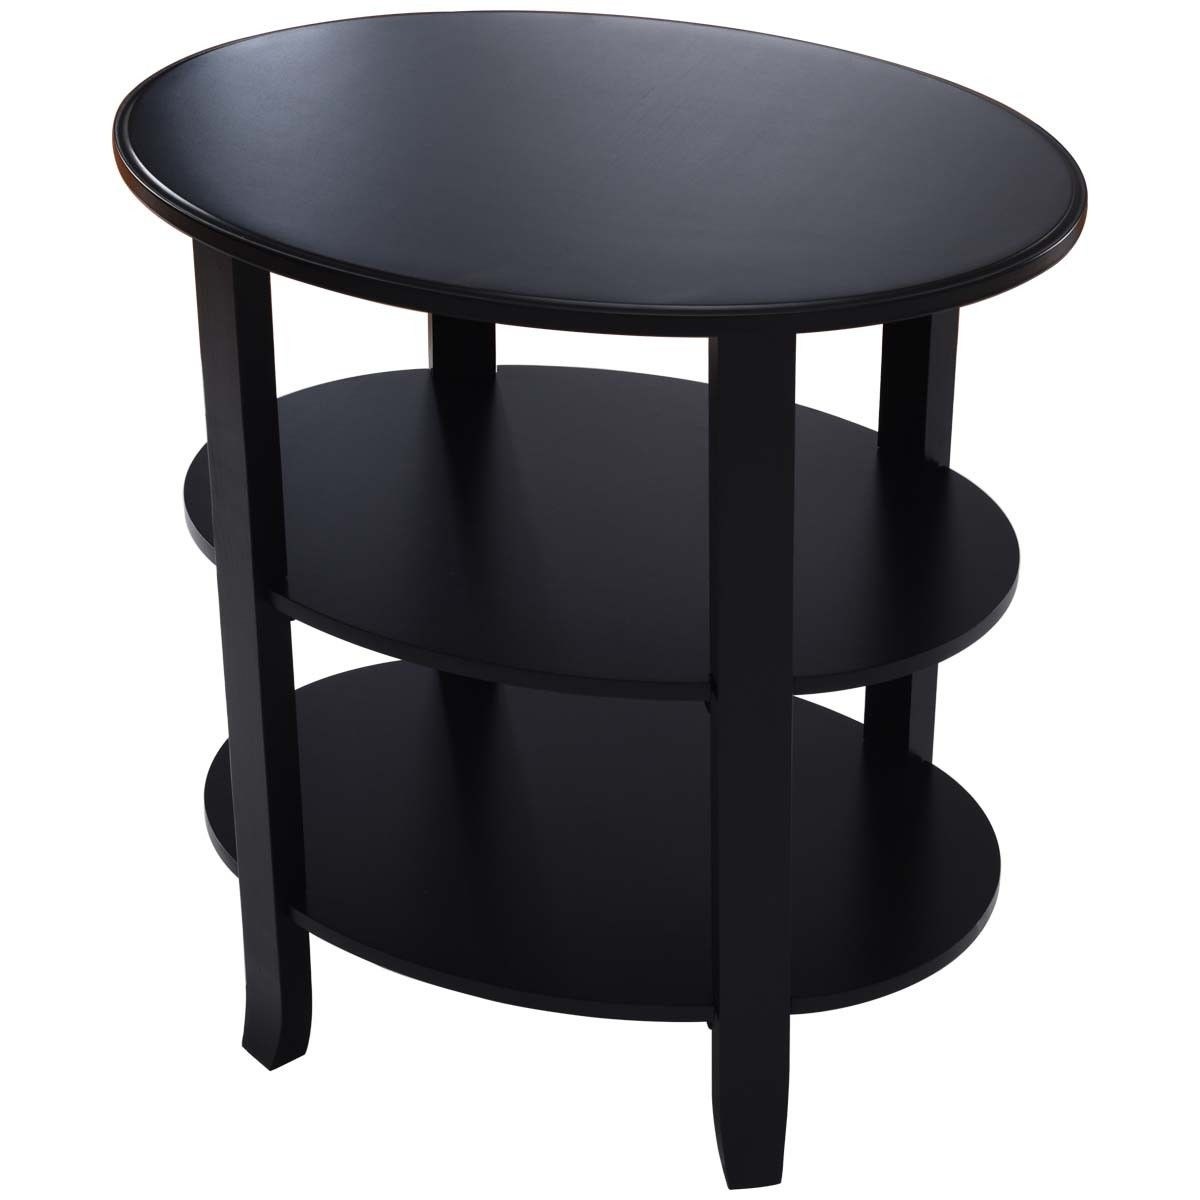 way tier oval end table accent coffee display shelf wooden legs black free shipping today nautical lighting ideas linen napkins bulk marble top lawn furniture wrought iron tables